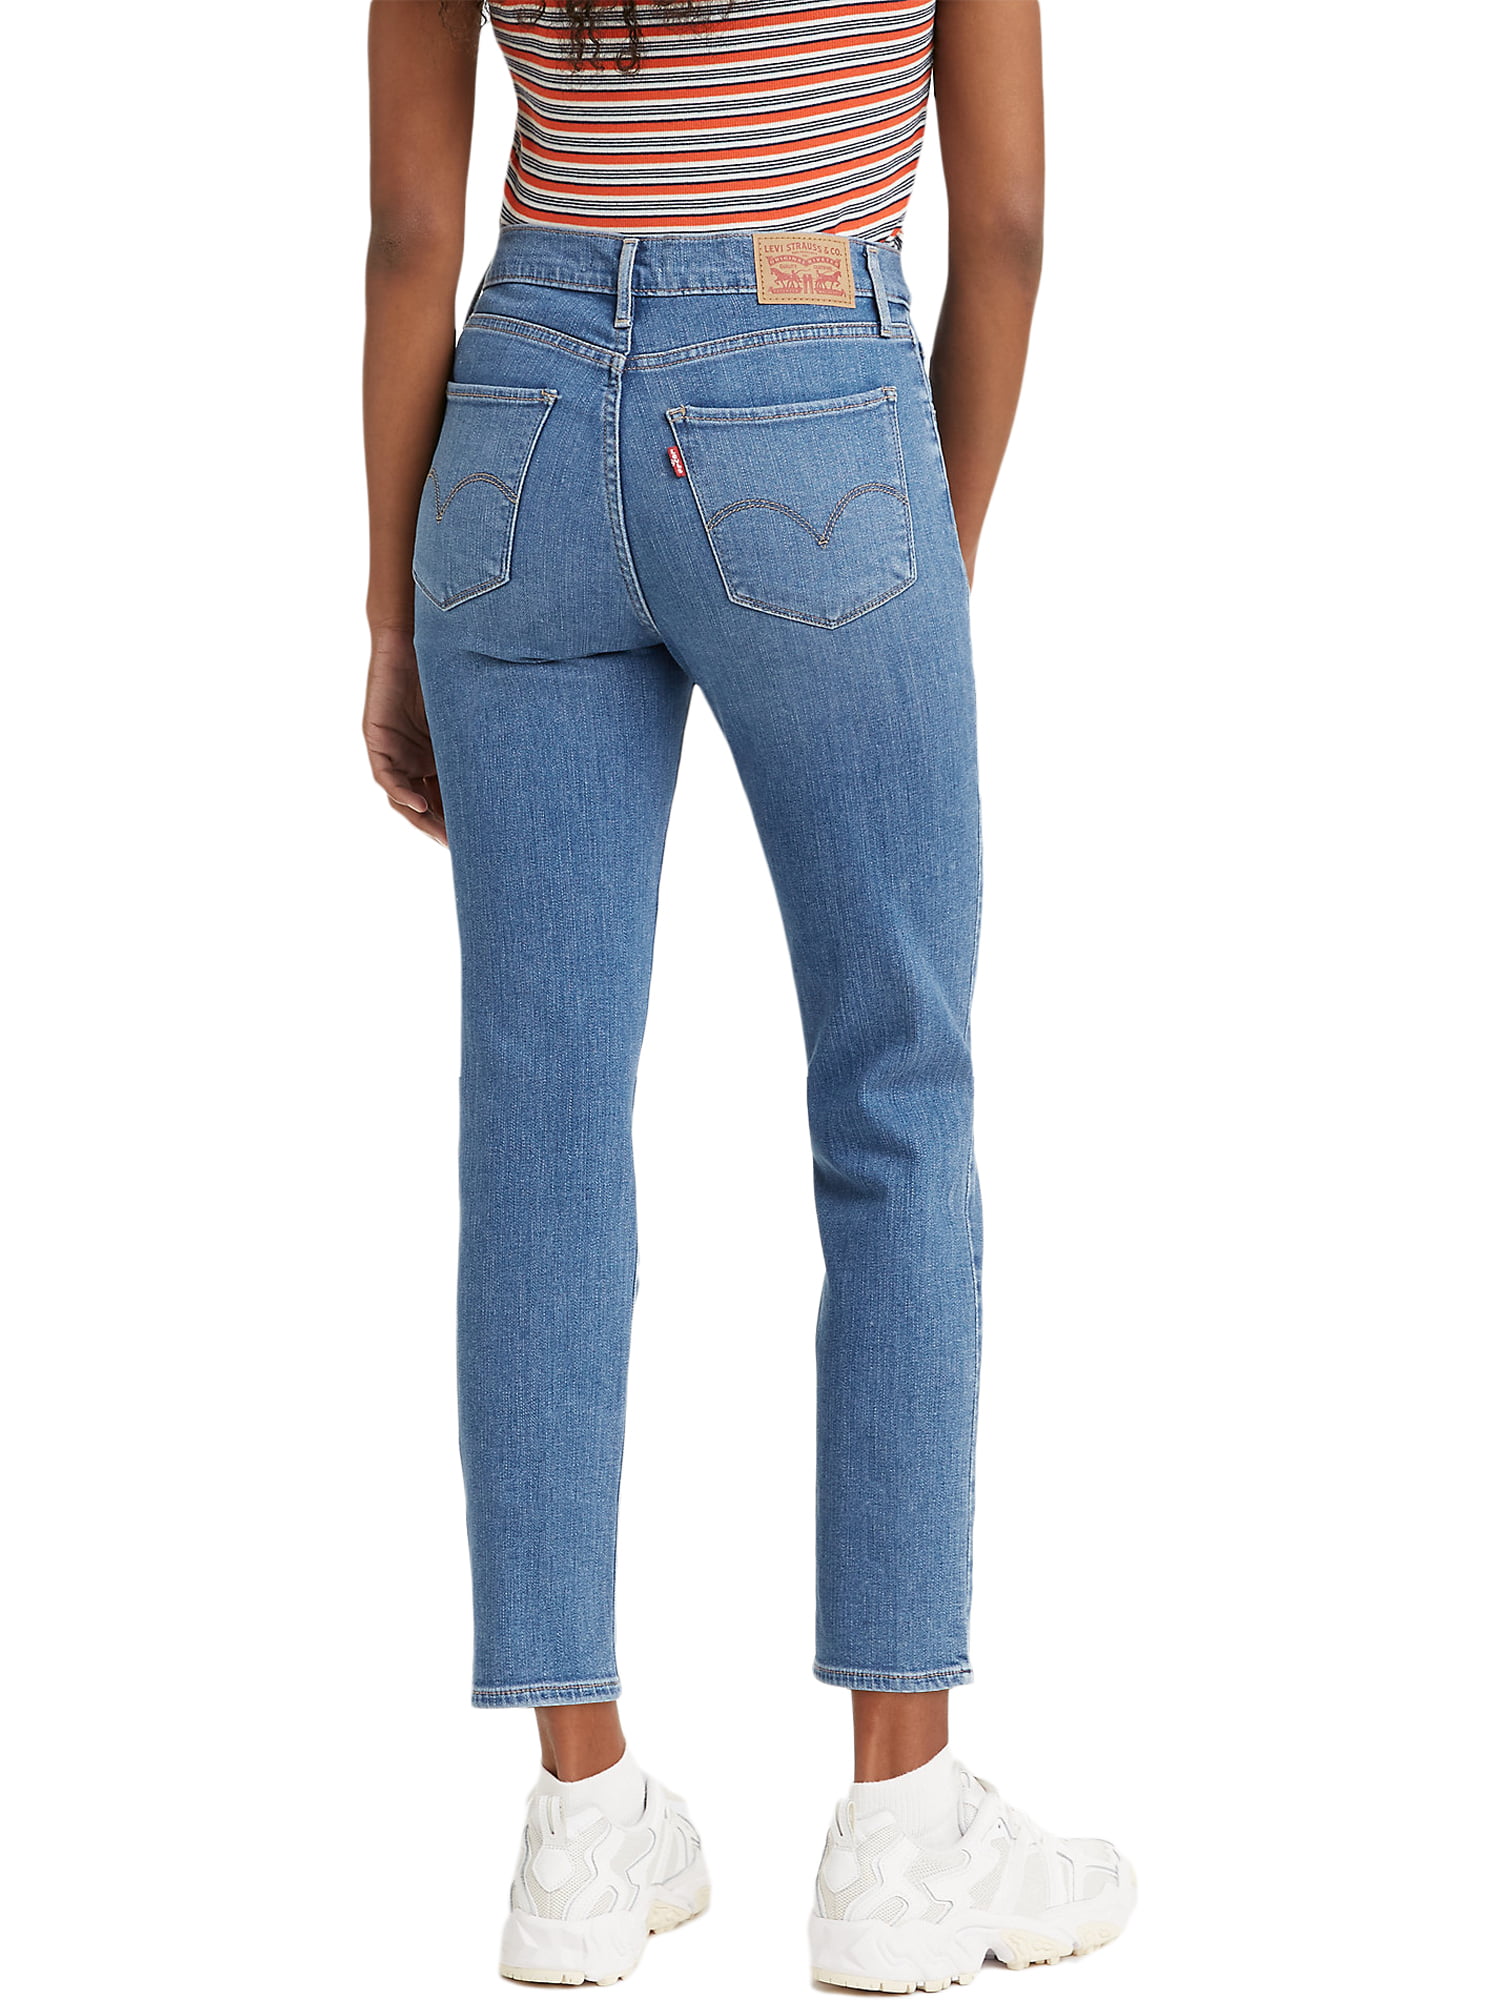 Levi's Original Red Tab Women's 724 High-Rise Straight Crop Jeans -  